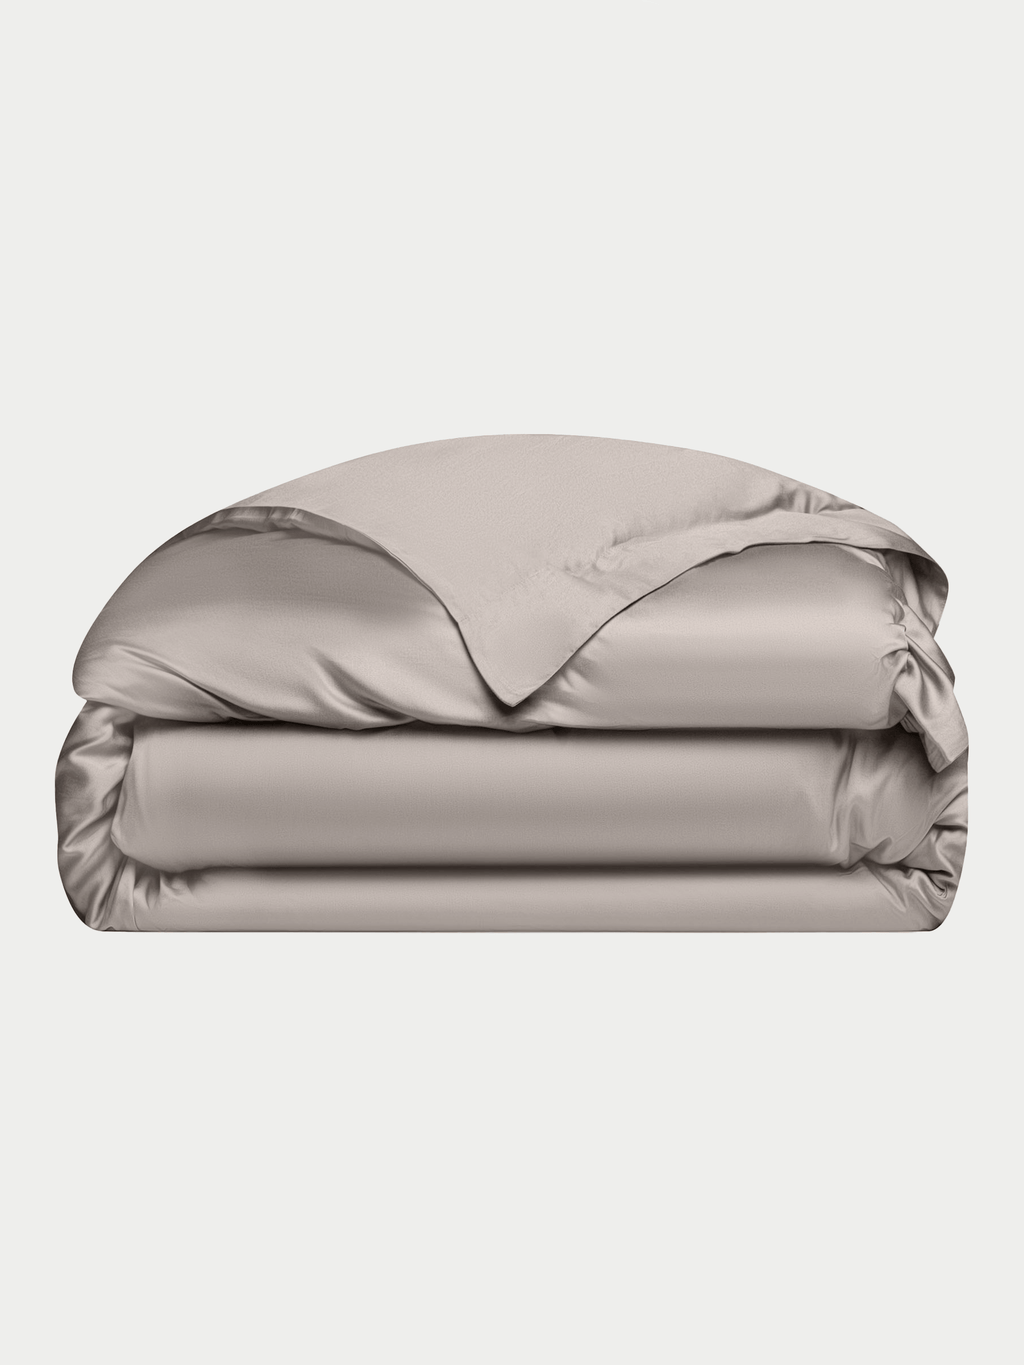 Bamboo Duvet Cover - Cooling Duvet Cover | Cozy Earth